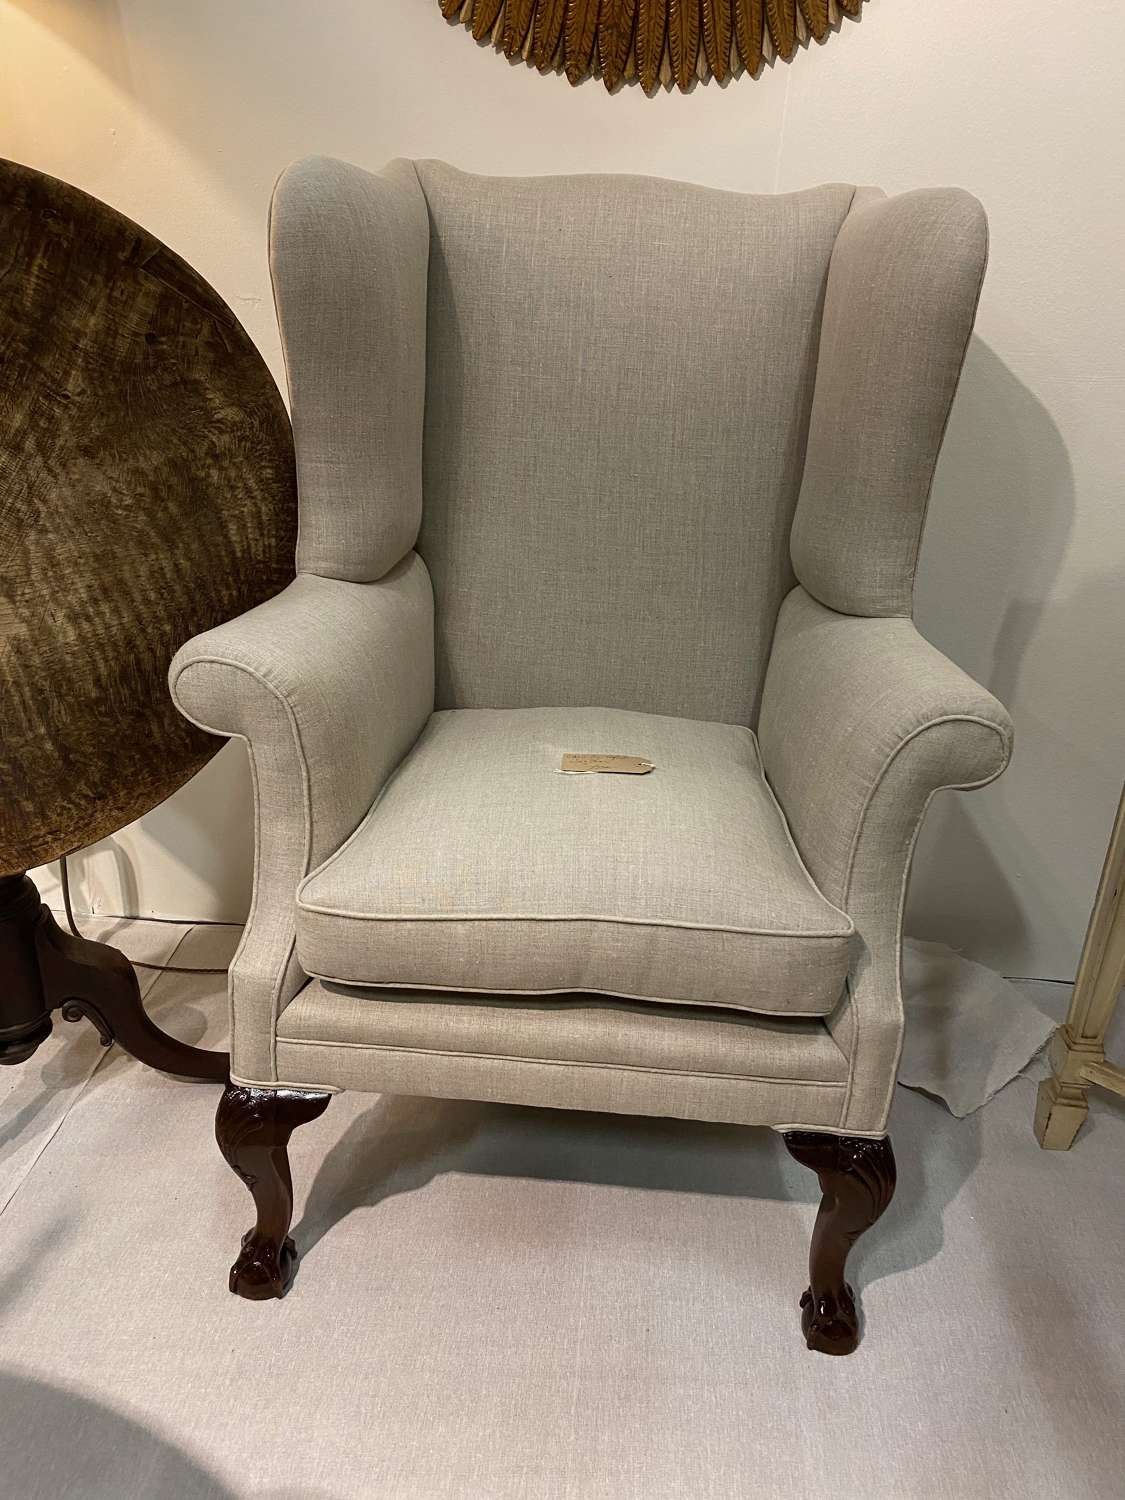 C1820 An English Wing Chair